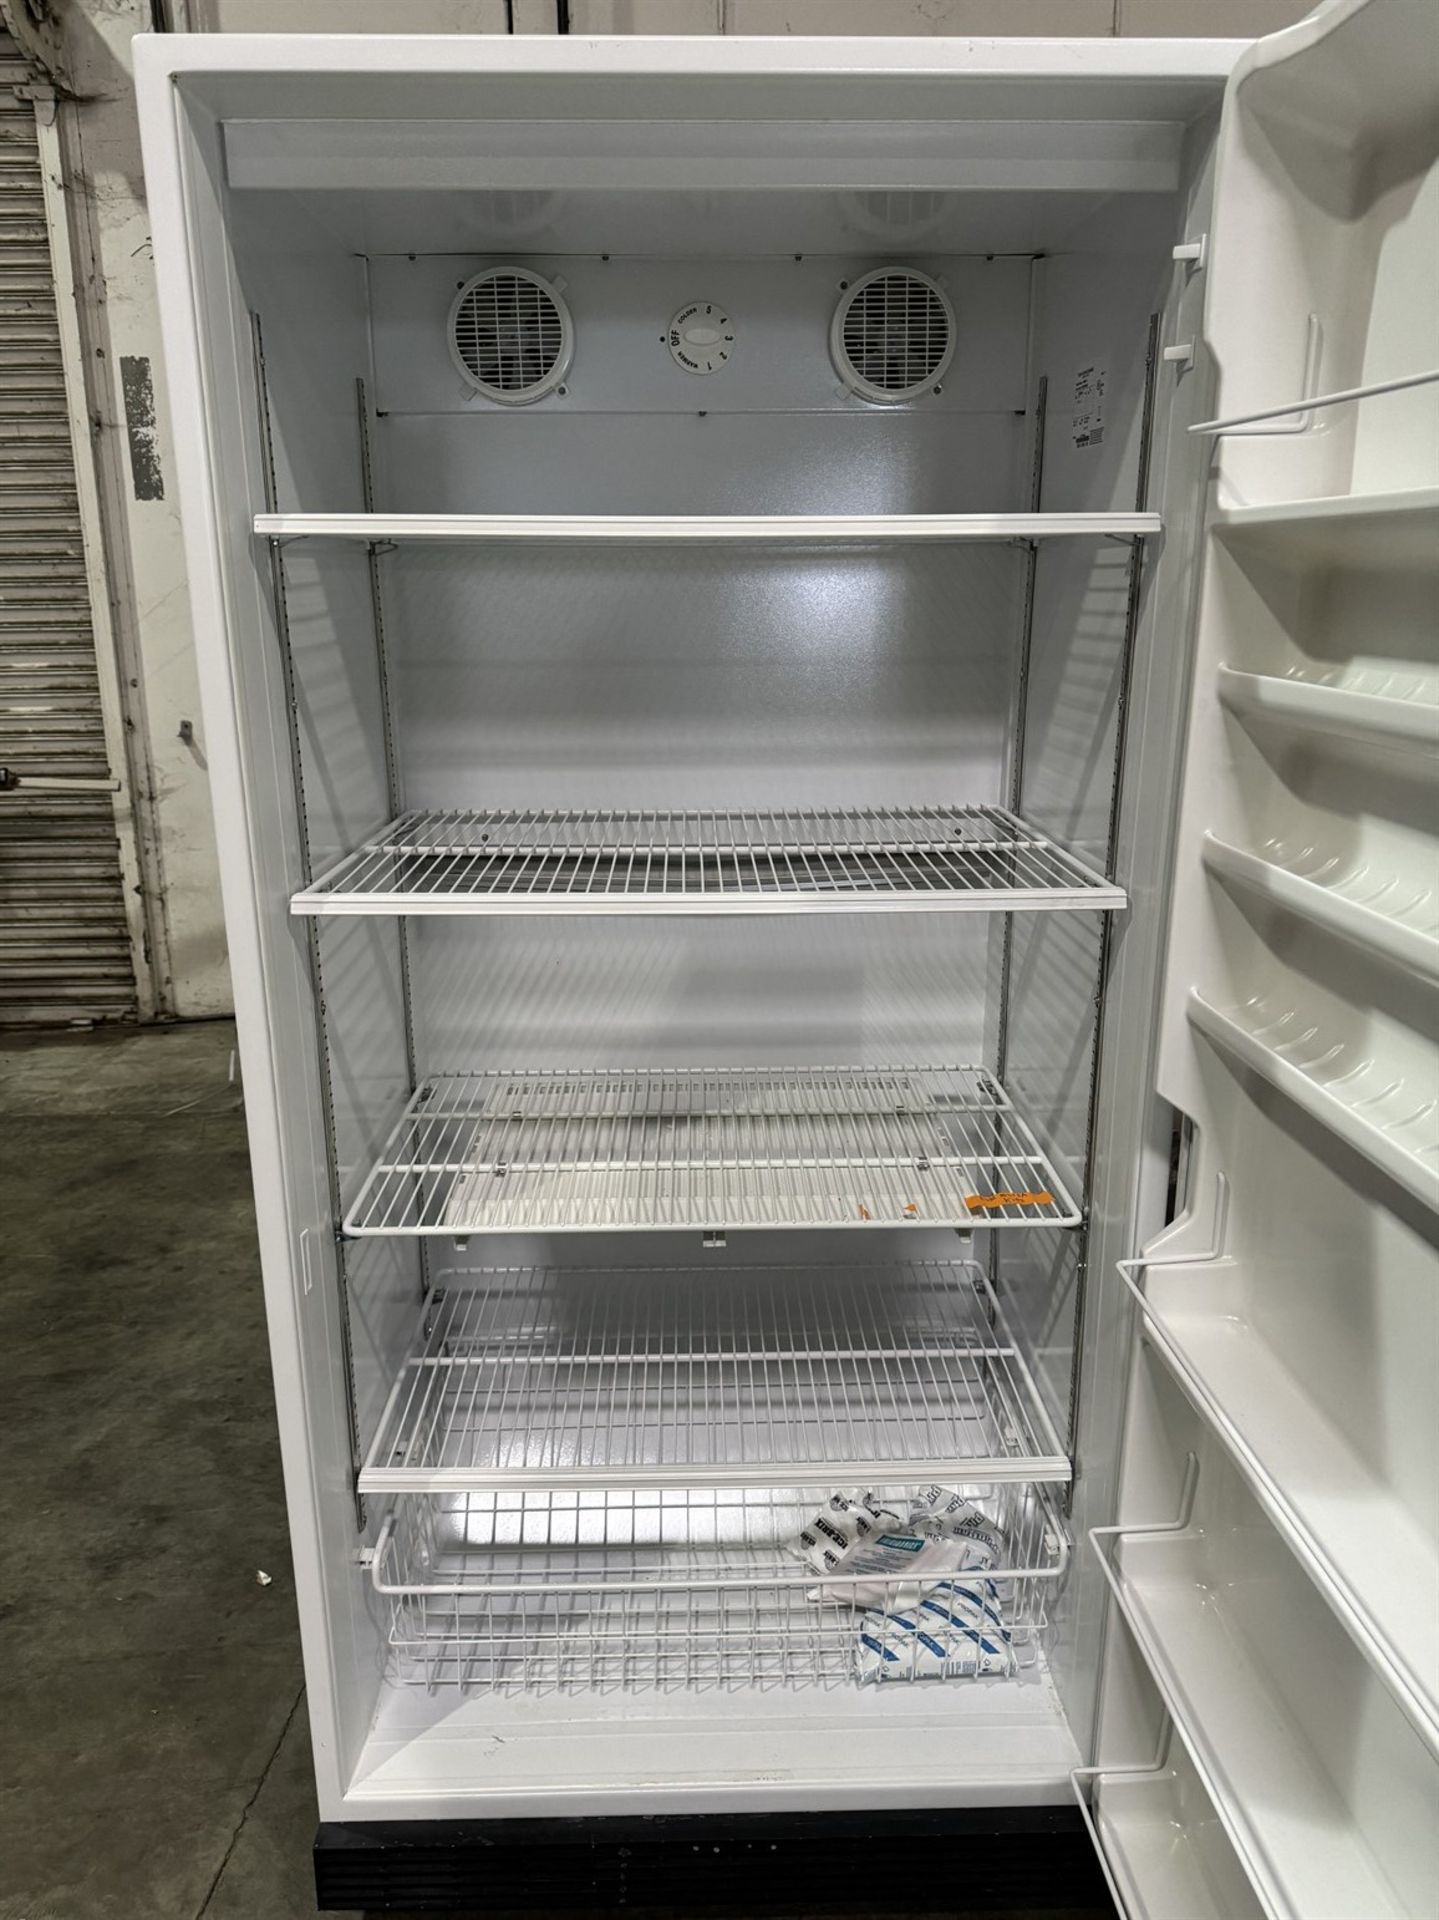 THERMO ELECTRON R429GA14 General Purpose Refrigerator, s/n W20R-615259-WR - Image 4 of 4